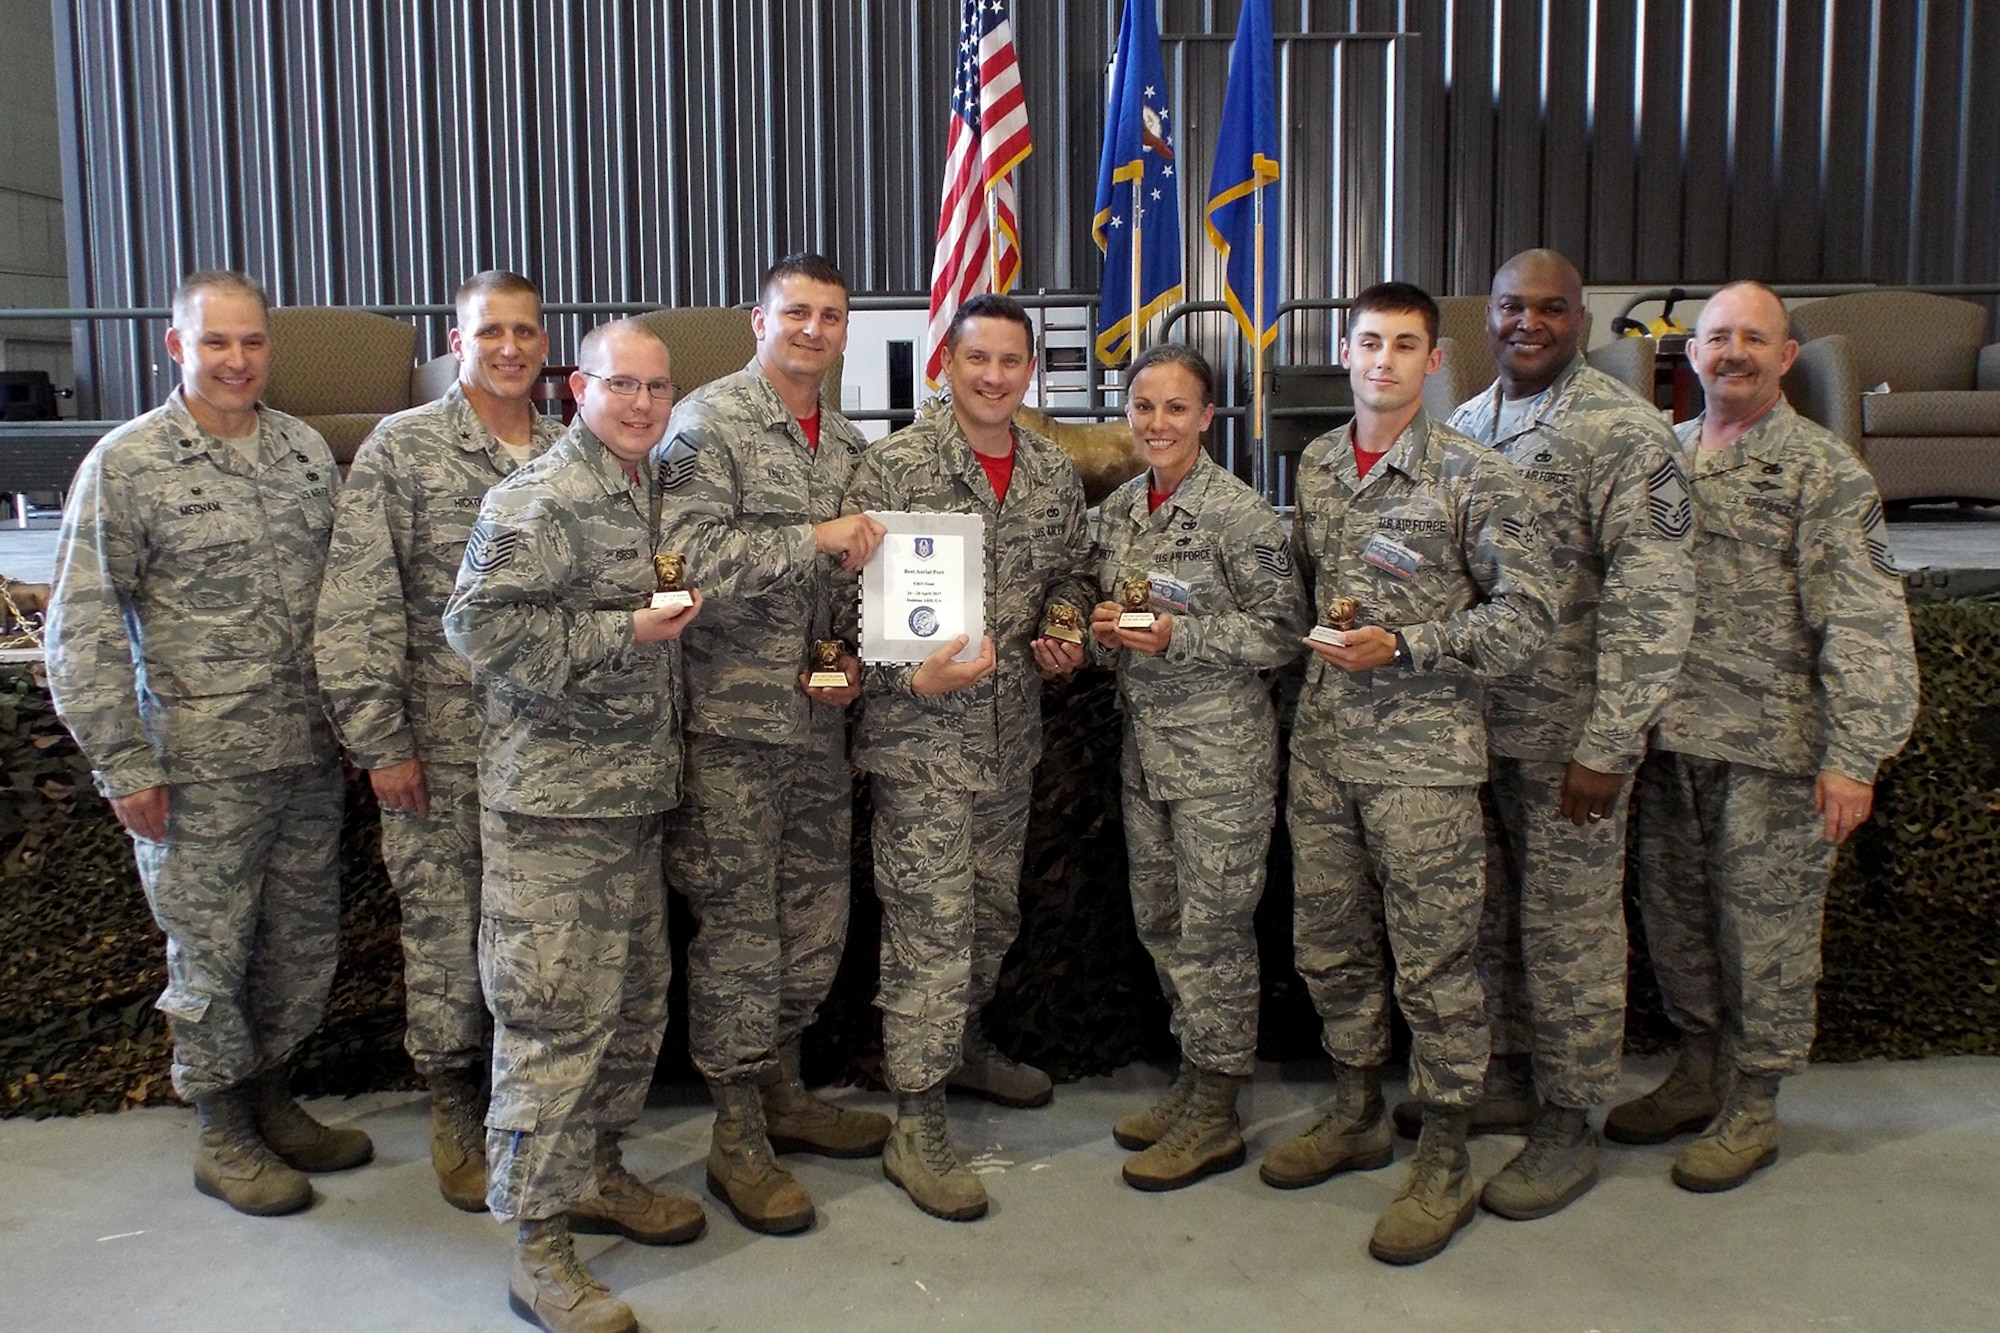 (Left to Right) U.S. Air Force Reserve Lt. Col. Keith Mecham, commander, 67th Aerial Port Squadron, Brig. Gen. John A. Hickok, deputy director of logistics, engineering and force protection, Headquarters Air Force Reserve Command, Tech Sgt. Jason Gibson, 96th Aerial Port Squadron, Master Sgt. Morgan Abner, 96th APS, Tech Sgt. Danny Canup, 96th APS, Tech Sgt. Kristen Garrett, 96th APS , Senior Airman Jacob Carter, 96th APS, Chief Master Sgt. Darius Drummond, air transportation career field manager, Headquarters Air Force, and Chief Master Sgt. Richard Hiney, Port Dawg Challenge Chief, and superintendent, 27th Aerial Port Squadron, pose for a photo after receiving the award for “Best Engine Running Onload/Offload (ERO) Team” during the 2017 Air Force Reserve Command Port Dawg Challenge awards ceremony April 27, 2017, at Dobbins Air Reserve Base, Ga. Twenty-three teams competed in 12 events over three days to prove their air transportation skills. (U.S. Air Force photo by Tech. Sgt. Debra Gentry/Released)